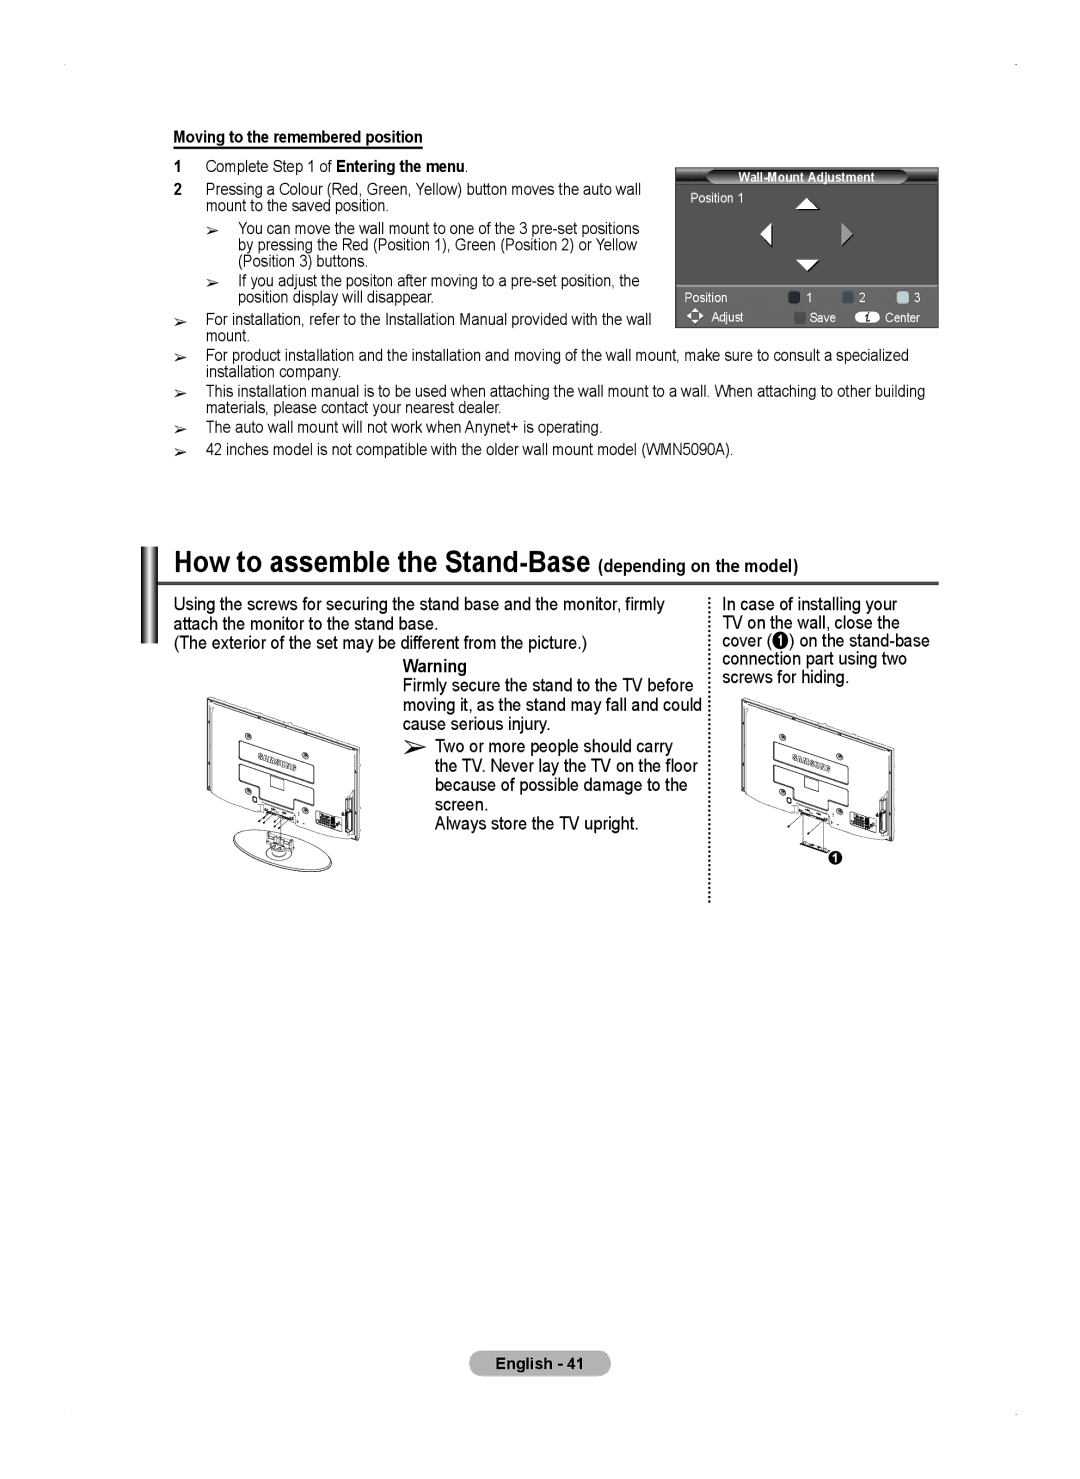 Samsung PS50A450 user manual How to assemble the Stand-Base depending on the model, Moving to the remembered position 